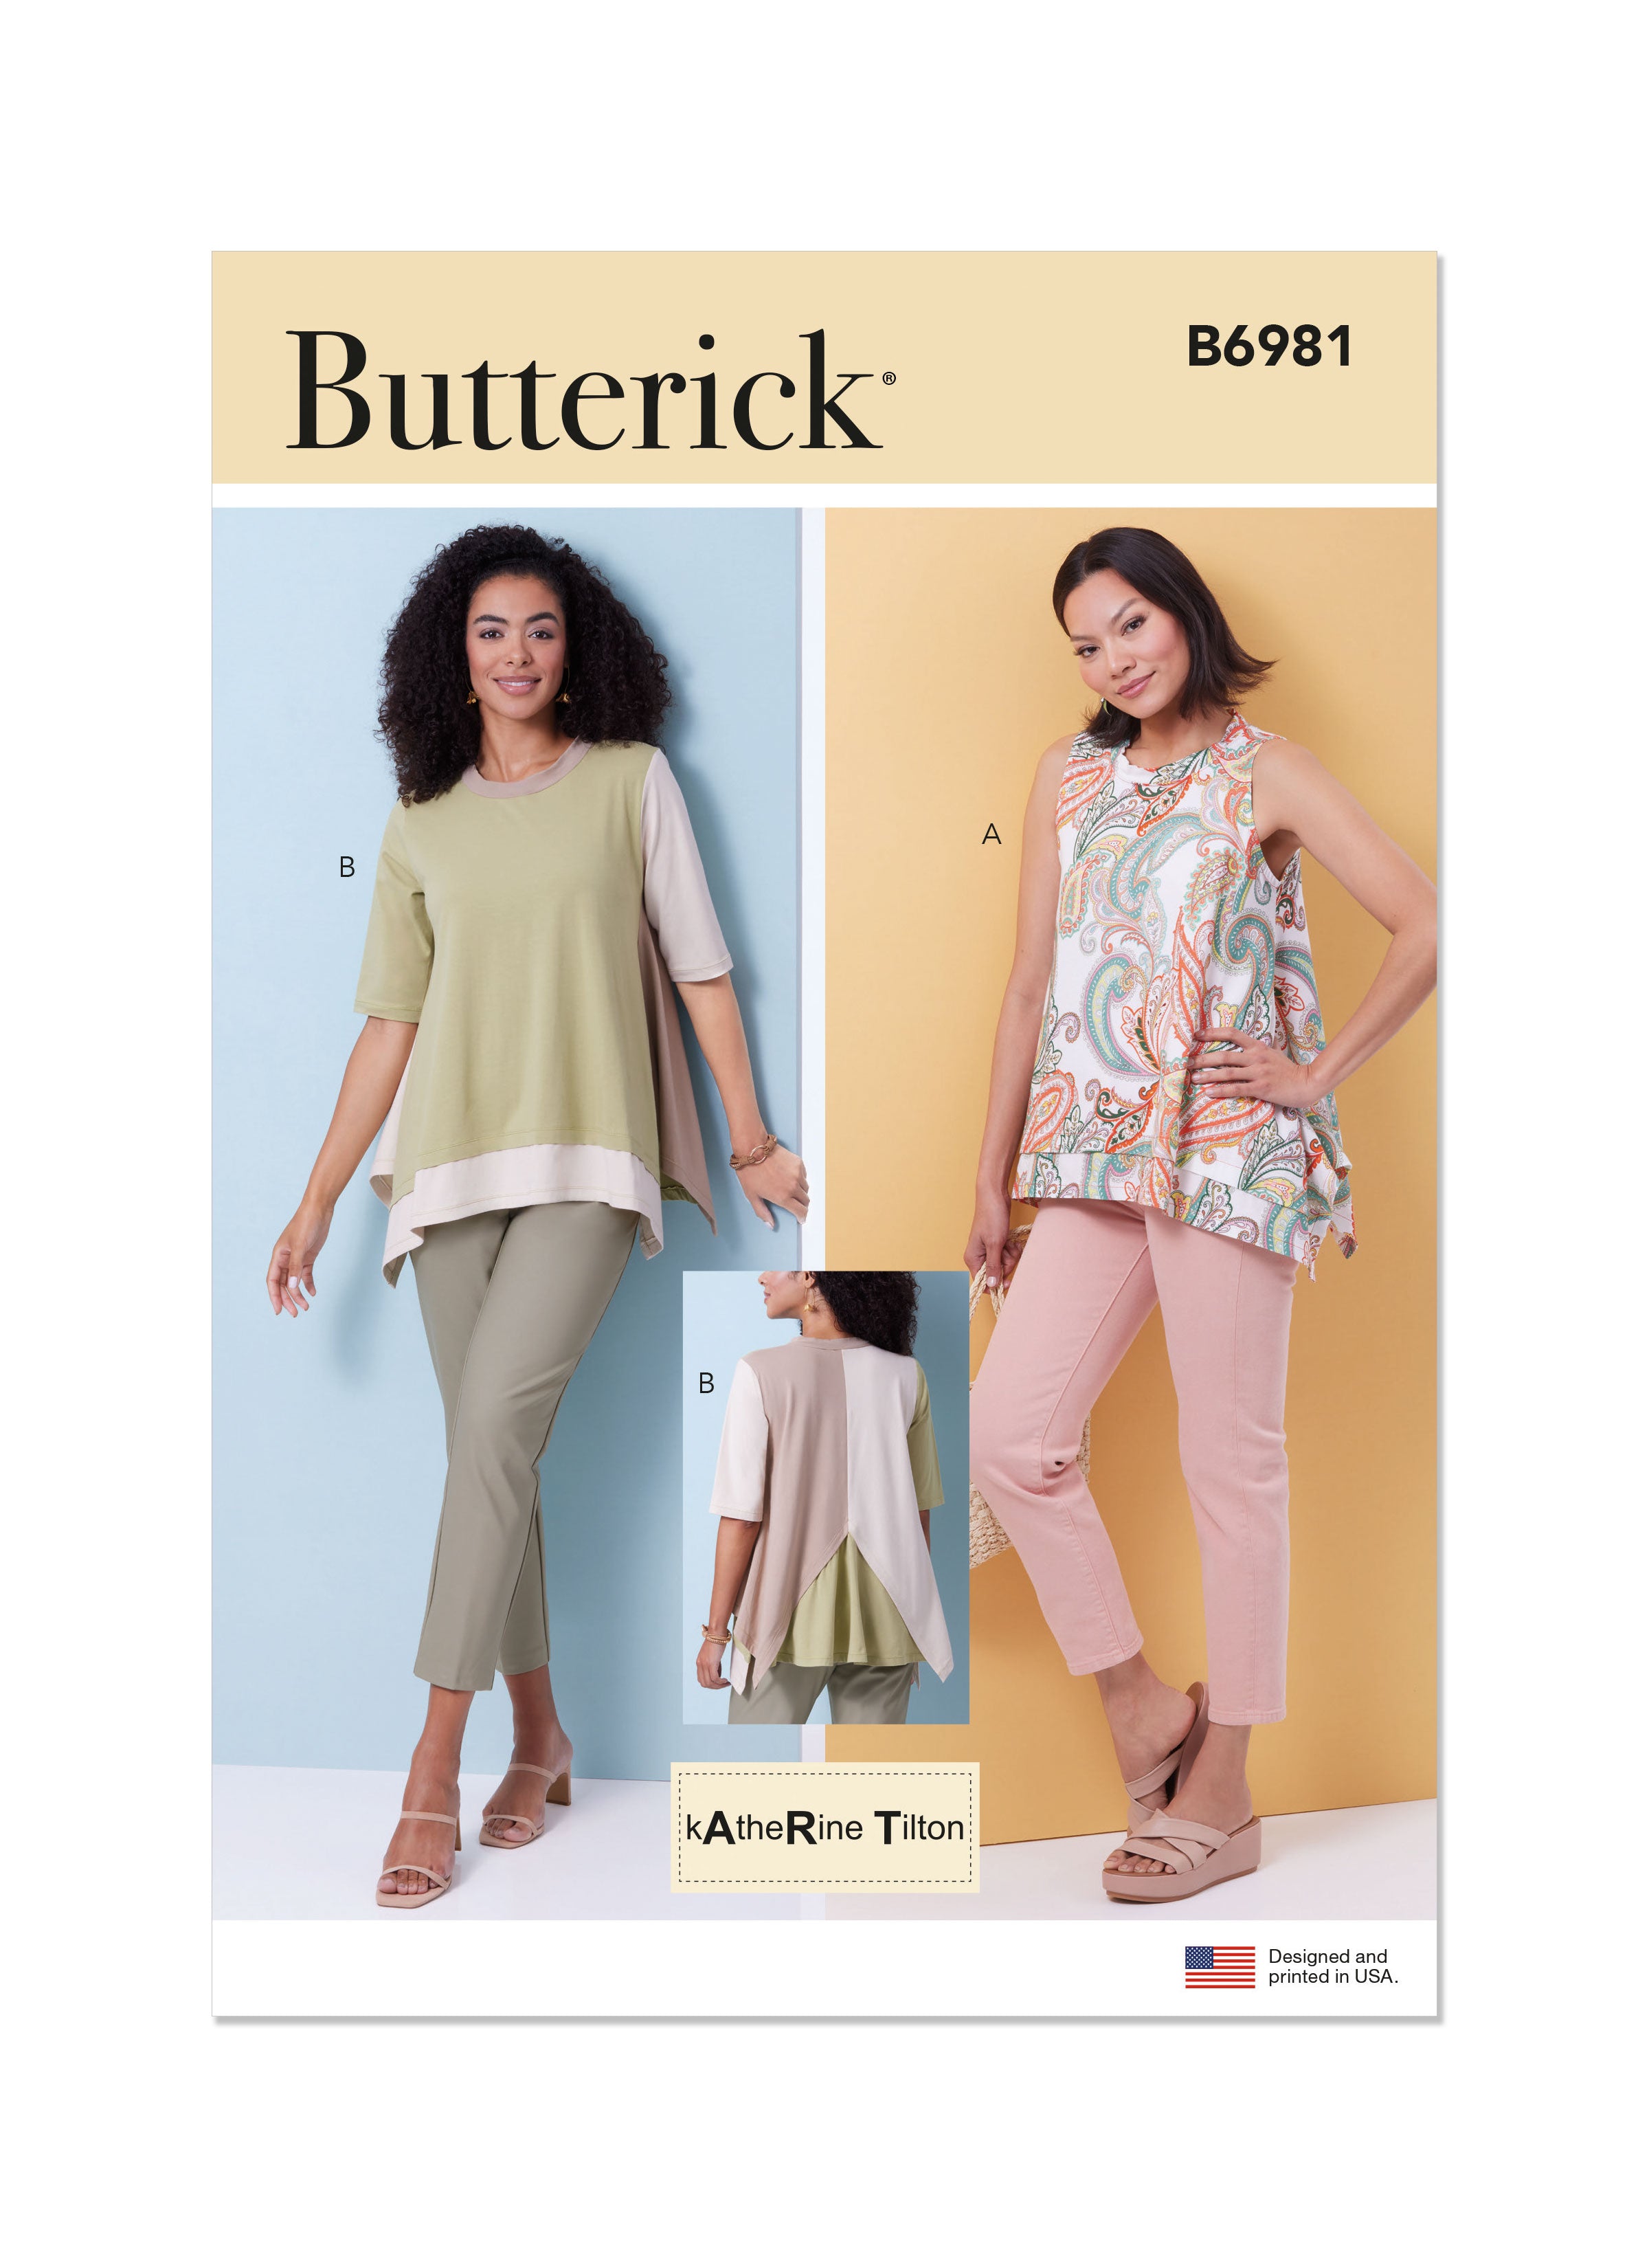 Butterick sewing pattern B6981 Misses' Tops by Katherine Tilton from Jaycotts Sewing Supplies